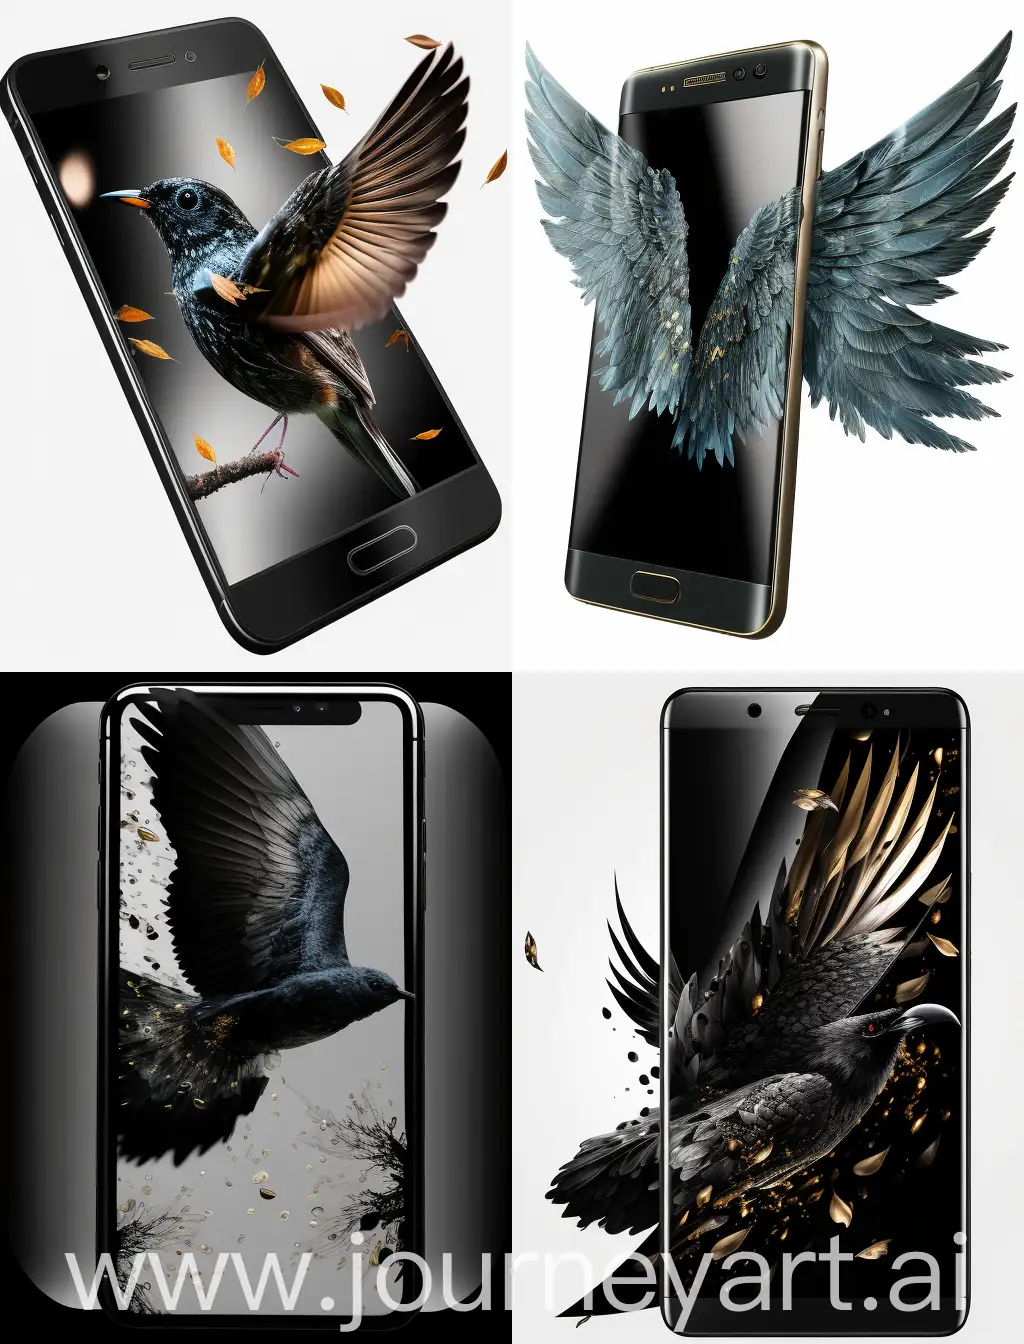 Gleaming-Black-Smartphone-in-Motion-Elegant-Tech-Product-Display